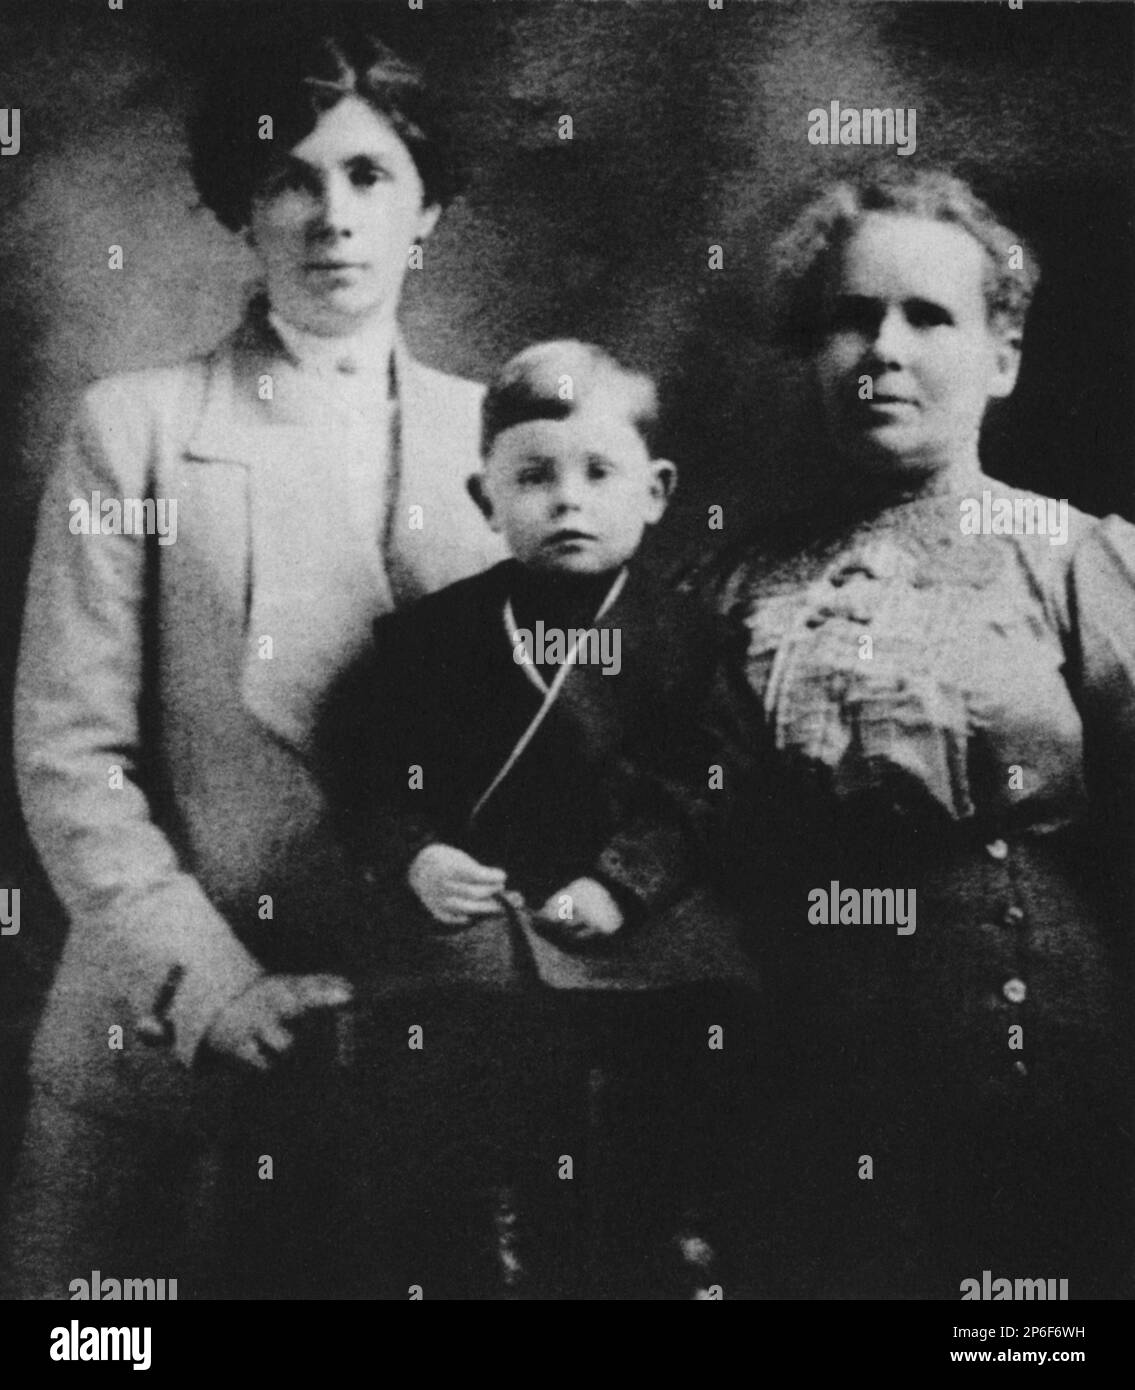 1912 , Galway : NORA JOYCE , wife of irish writer JAMES JOYCE ( Dublin 1882 - Zurich 1941 ), with son GIORGIO JOYCE and her mother ANNE BARNACLE   - SCRITTORE - LETTERATURA - LITERATURE  - portrait - ritratto ----  Archivio GBB Stock Photo